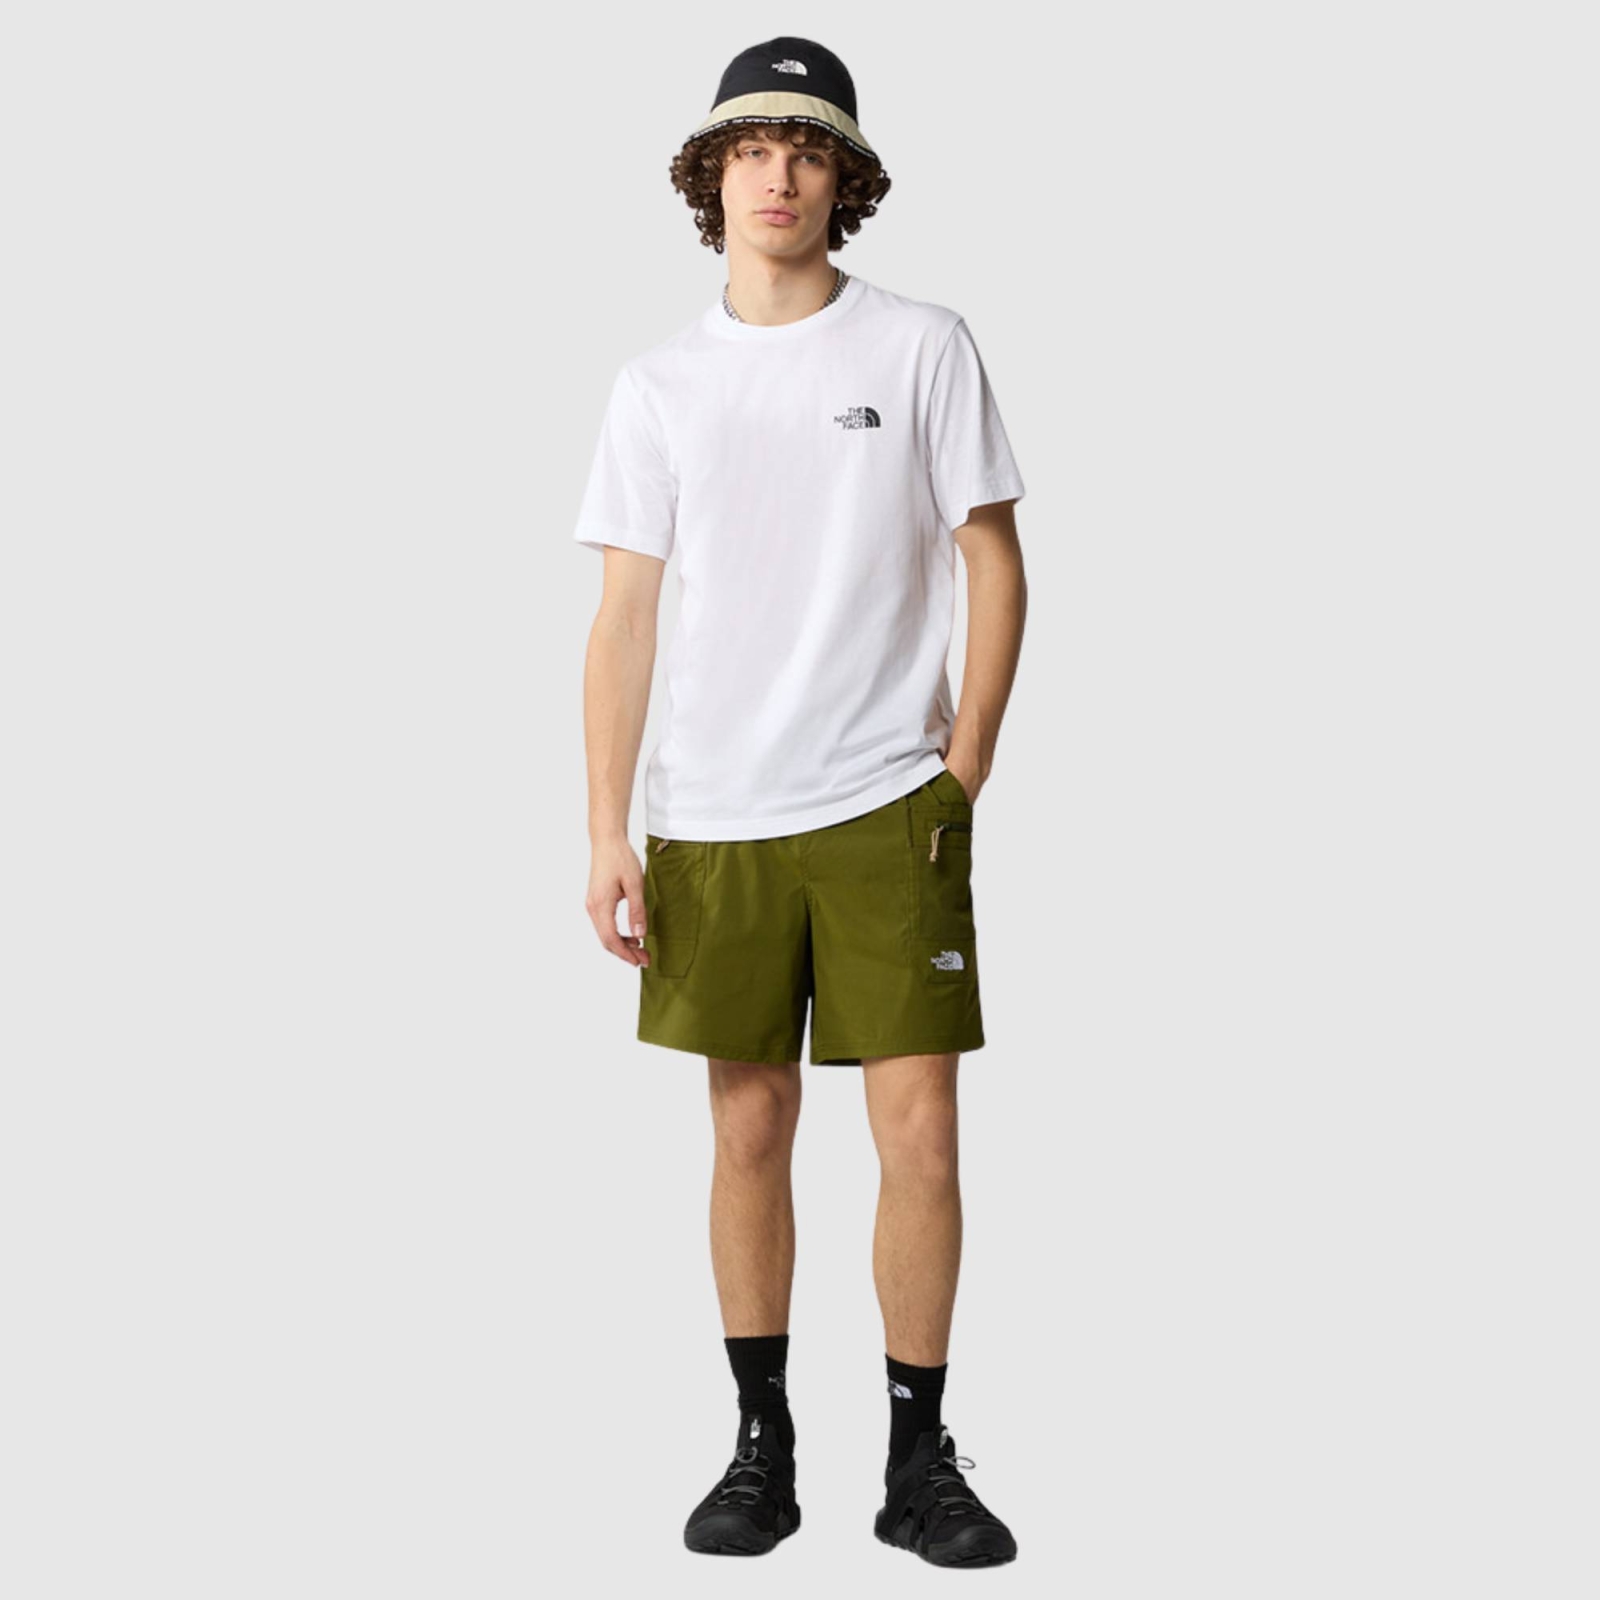 THE NORTH FACE MENS SIMPLE DOME TEE